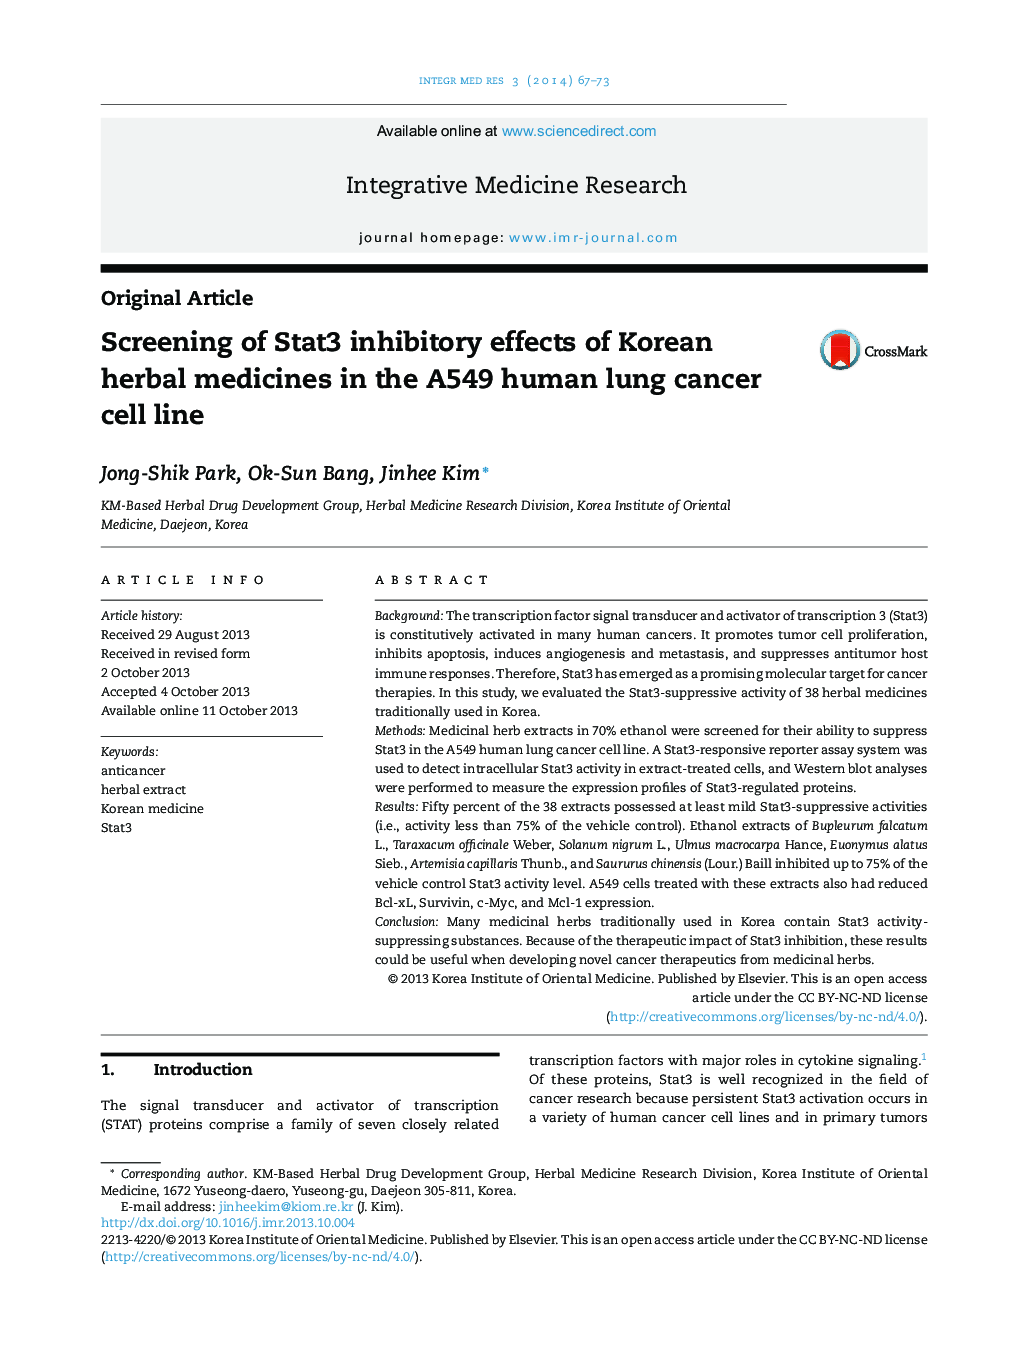 Screening of Stat3 inhibitory effects of Korean herbal medicines in the A549 human lung cancer cell line